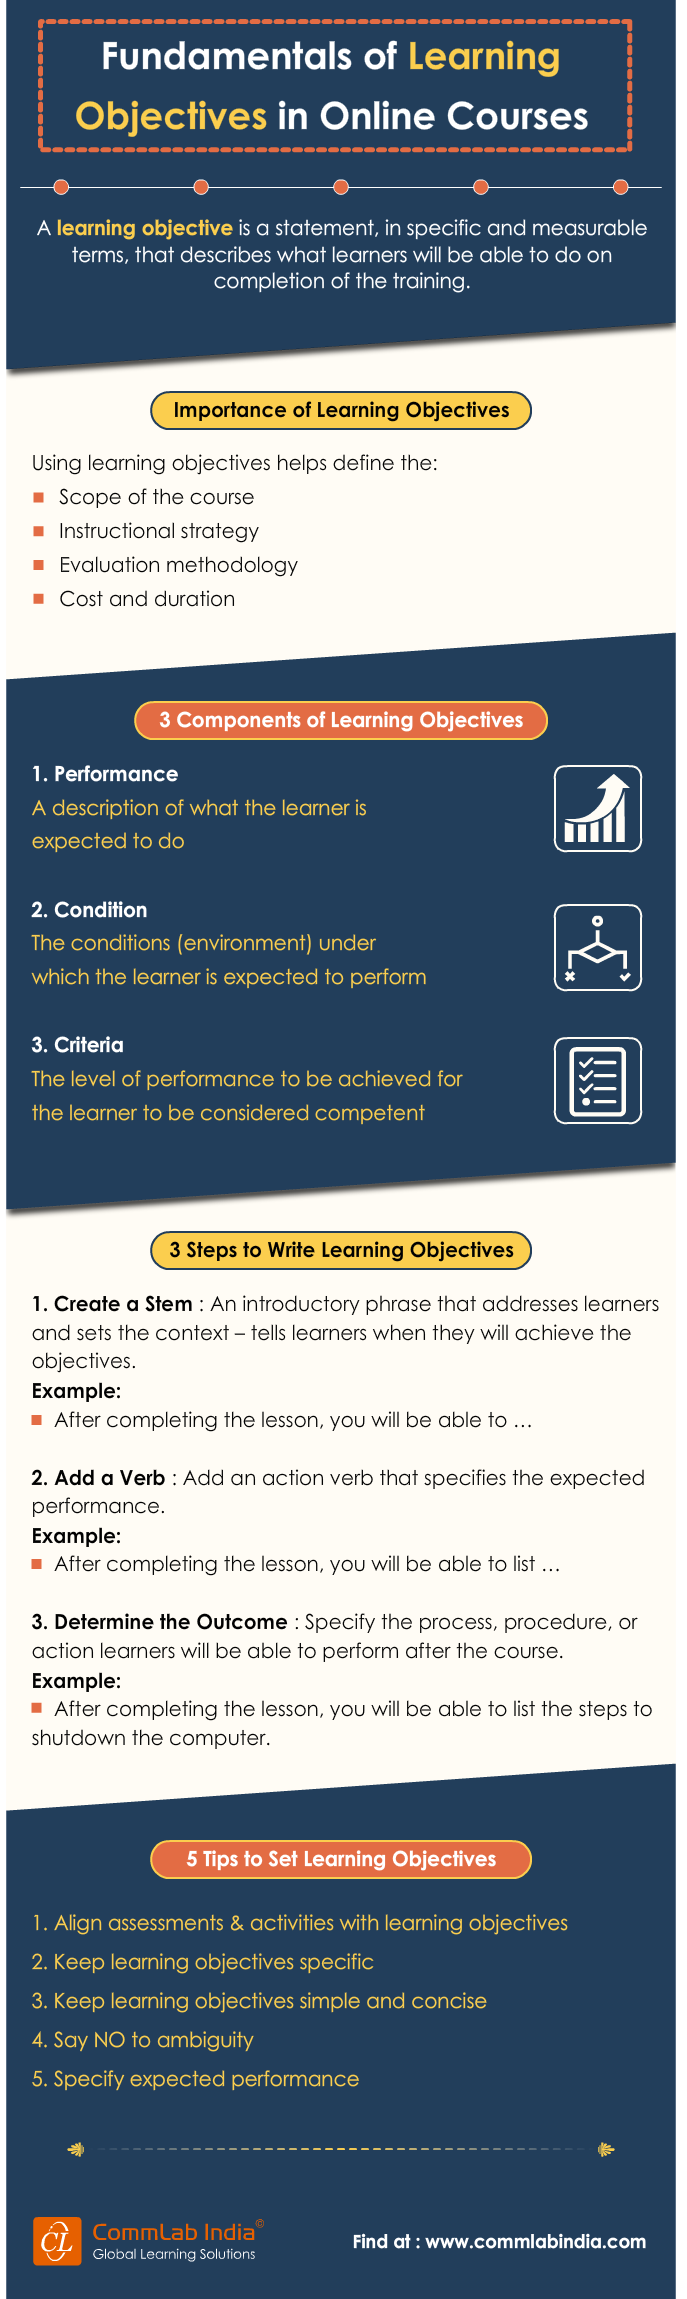 Fundamentals of Learning Objectives in Online Courses [Infographic]